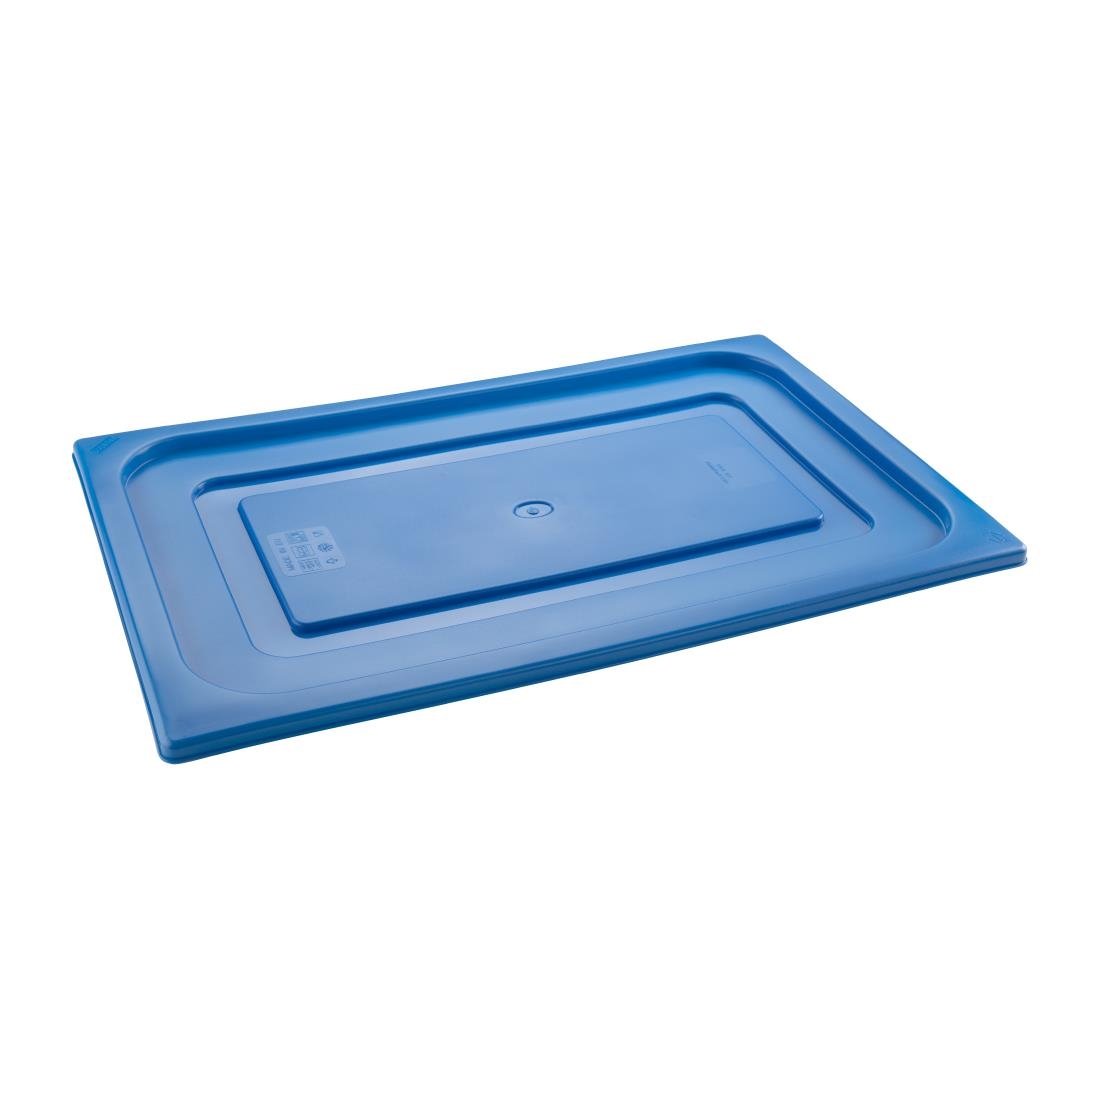 HT897 Pujadas Blue Polinorm Gastronorm Lid 1/4GN